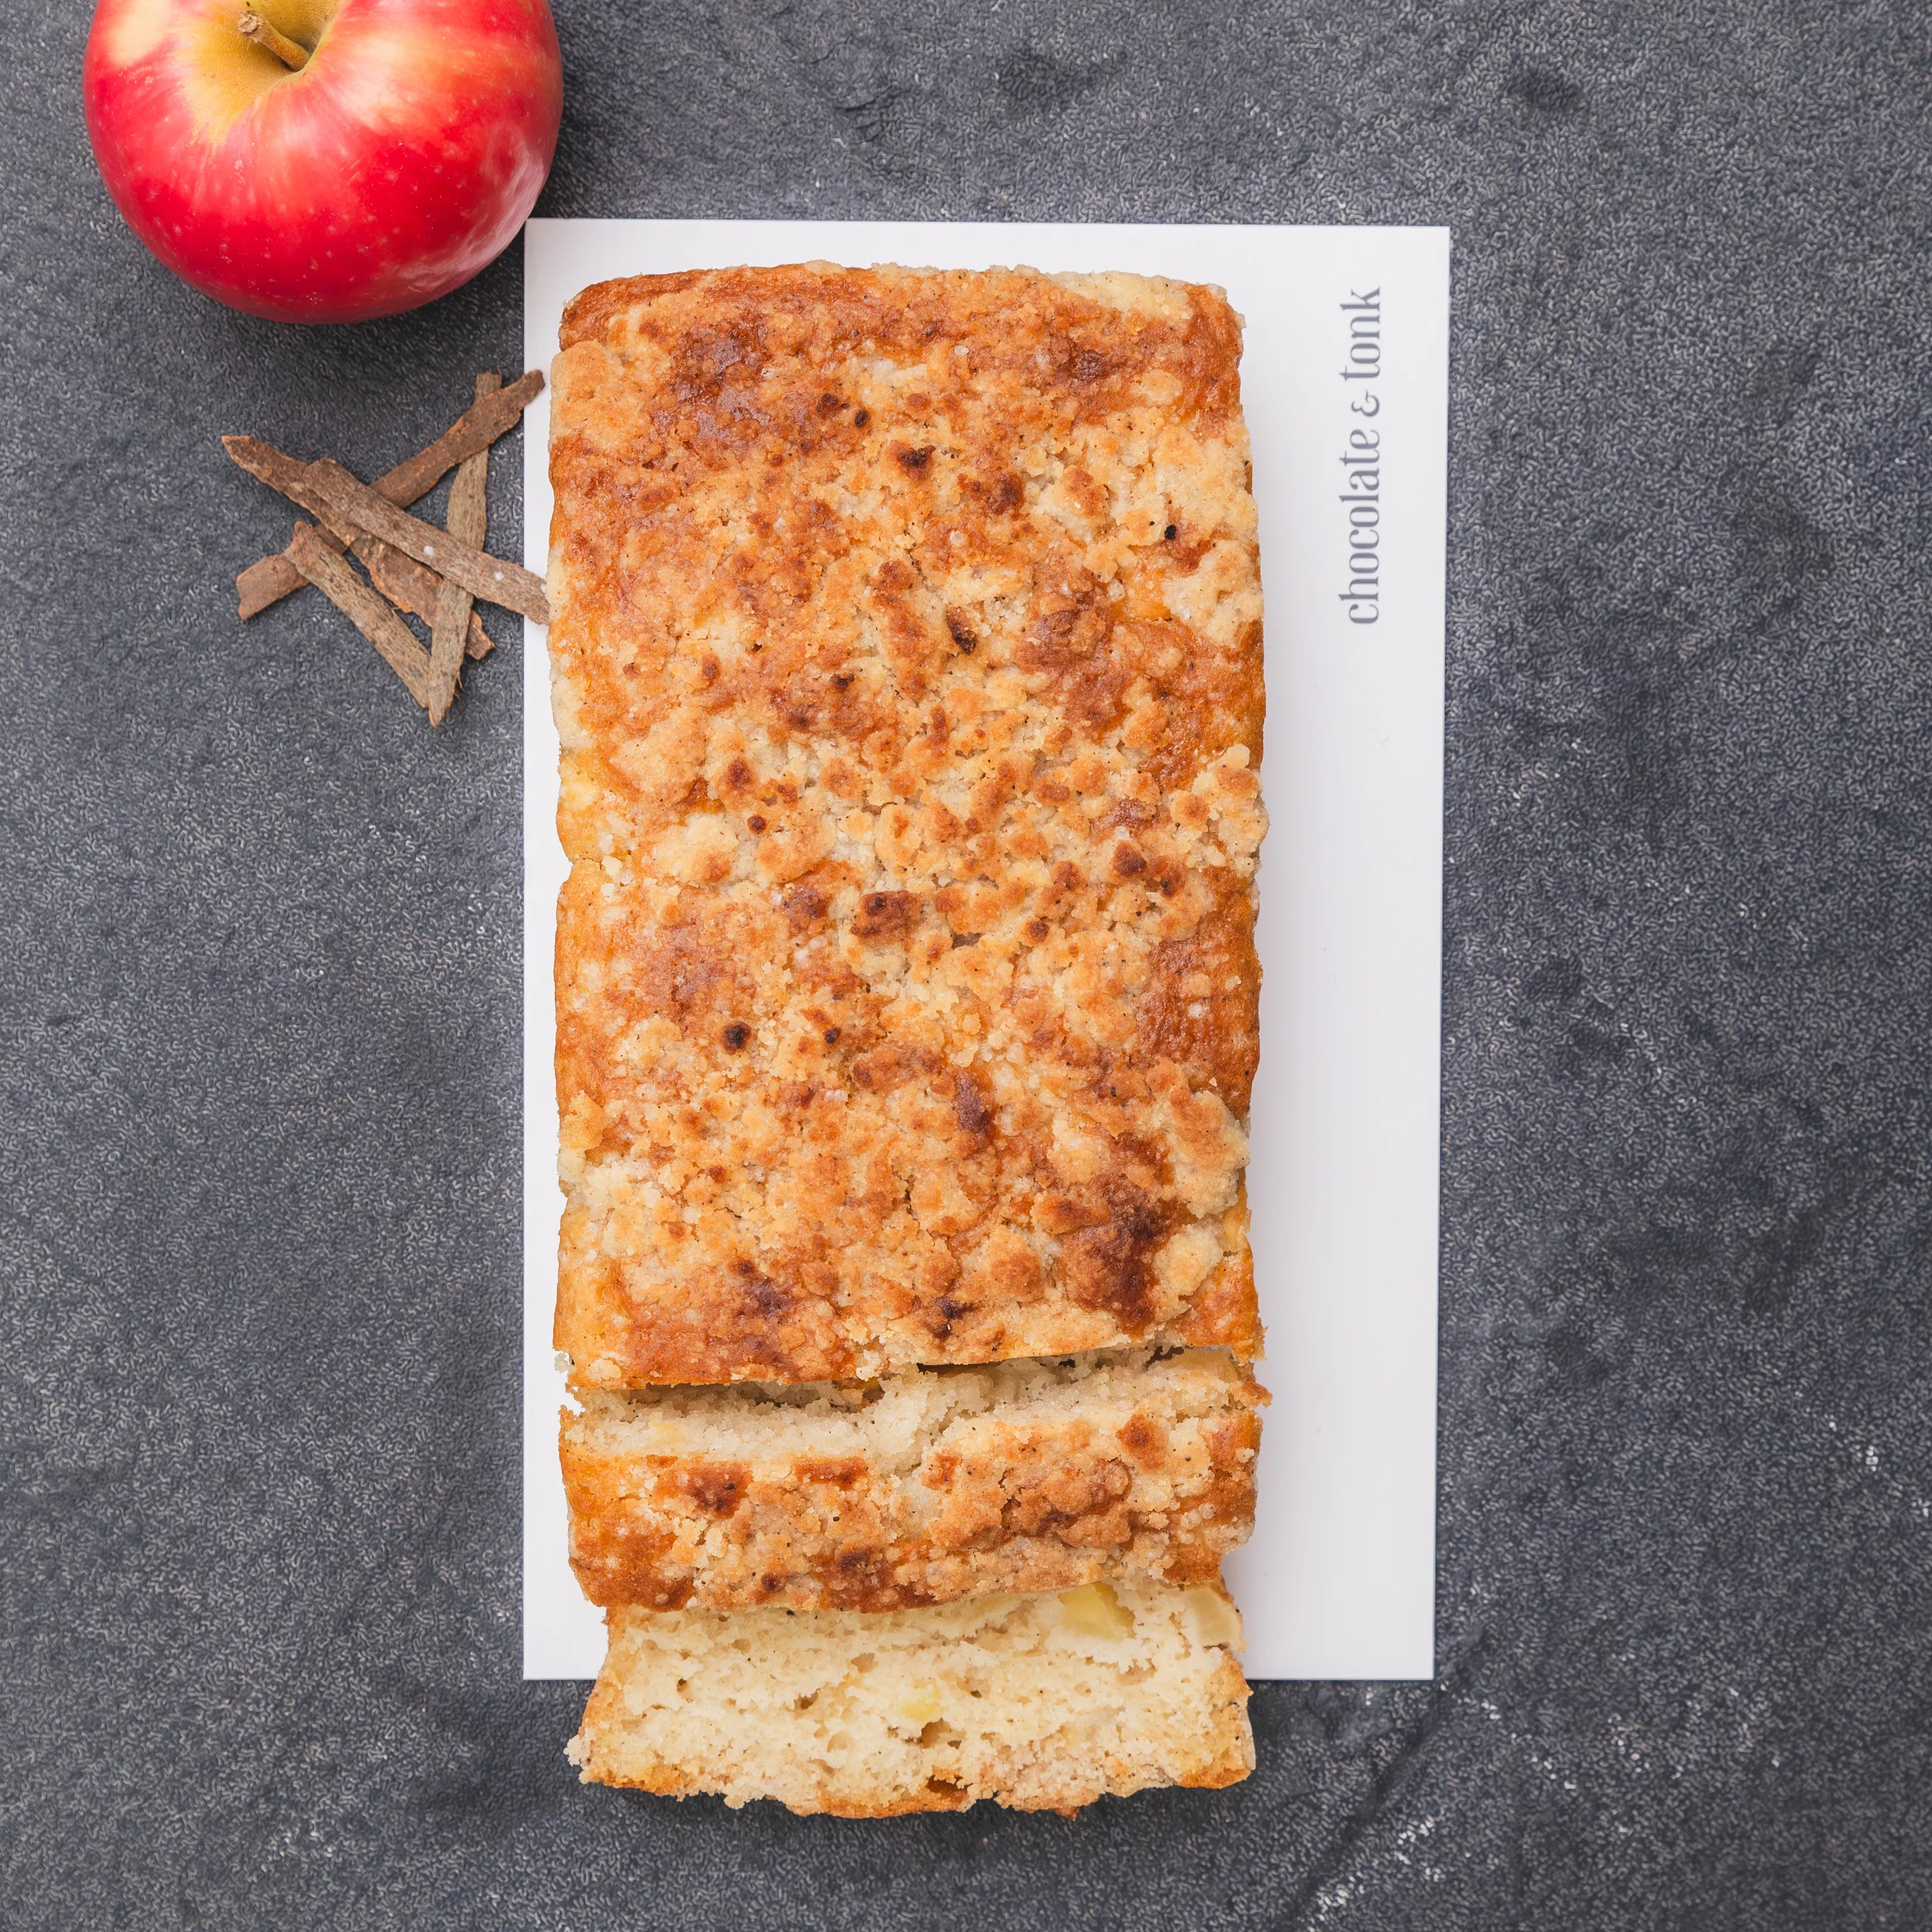 Homemade apple and crumble loaf with a delicious twist